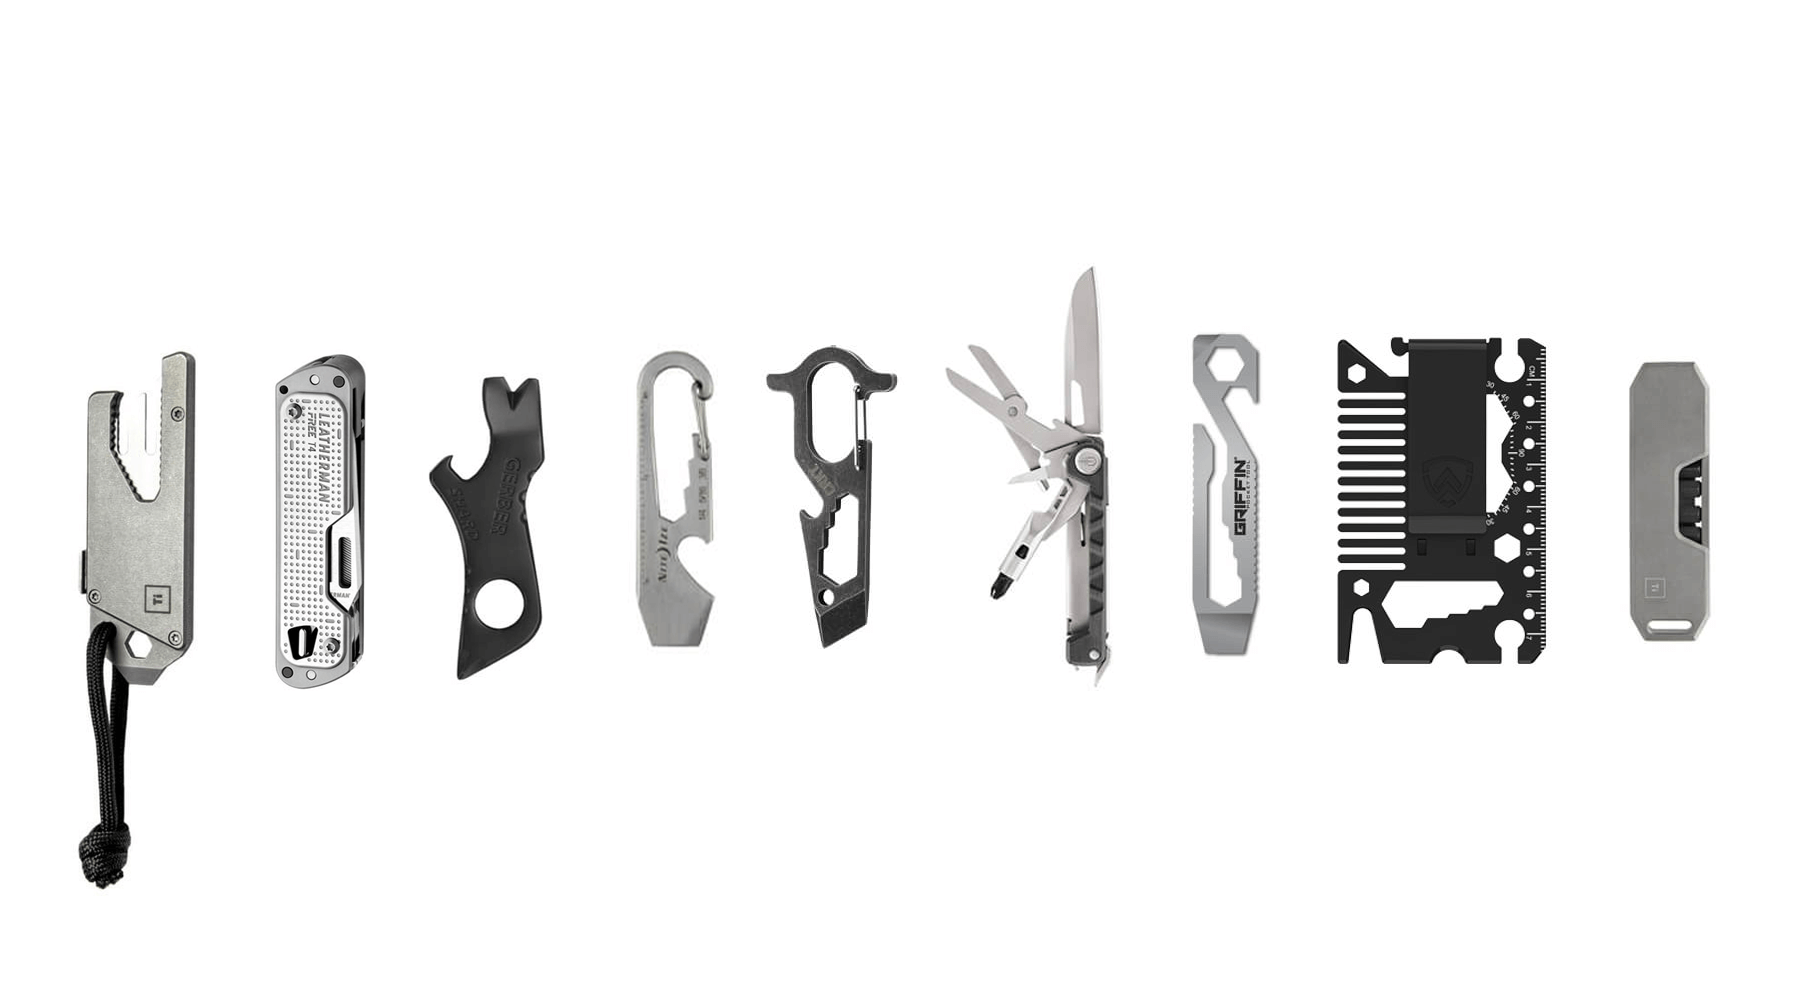 10 Best Pocket Multi-Tools for EDC (Everyday Carry)